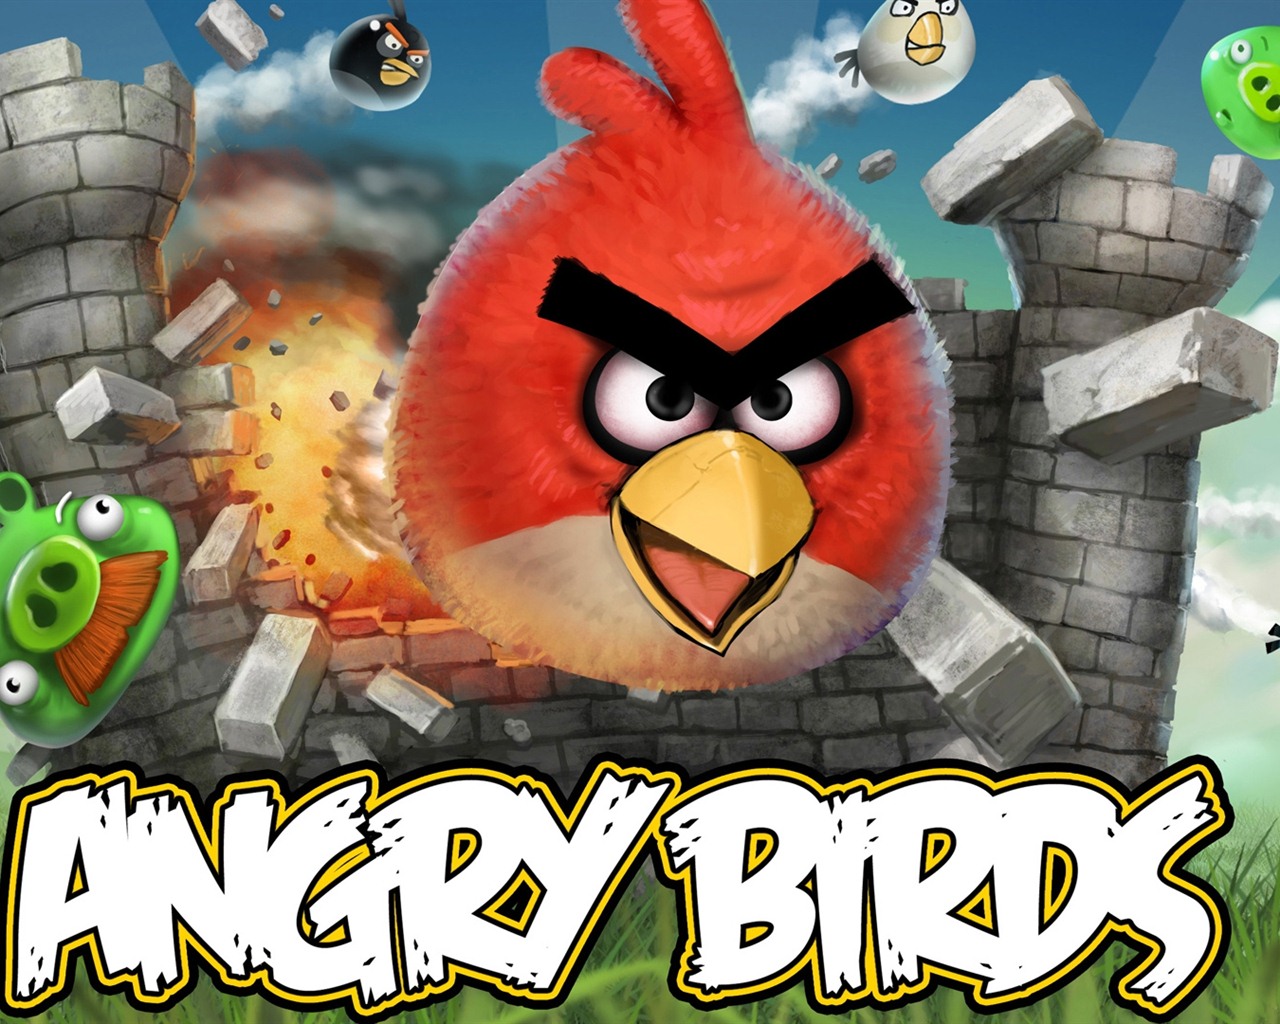 Angry Birds Spiel wallpapers #15 - 1280x1024